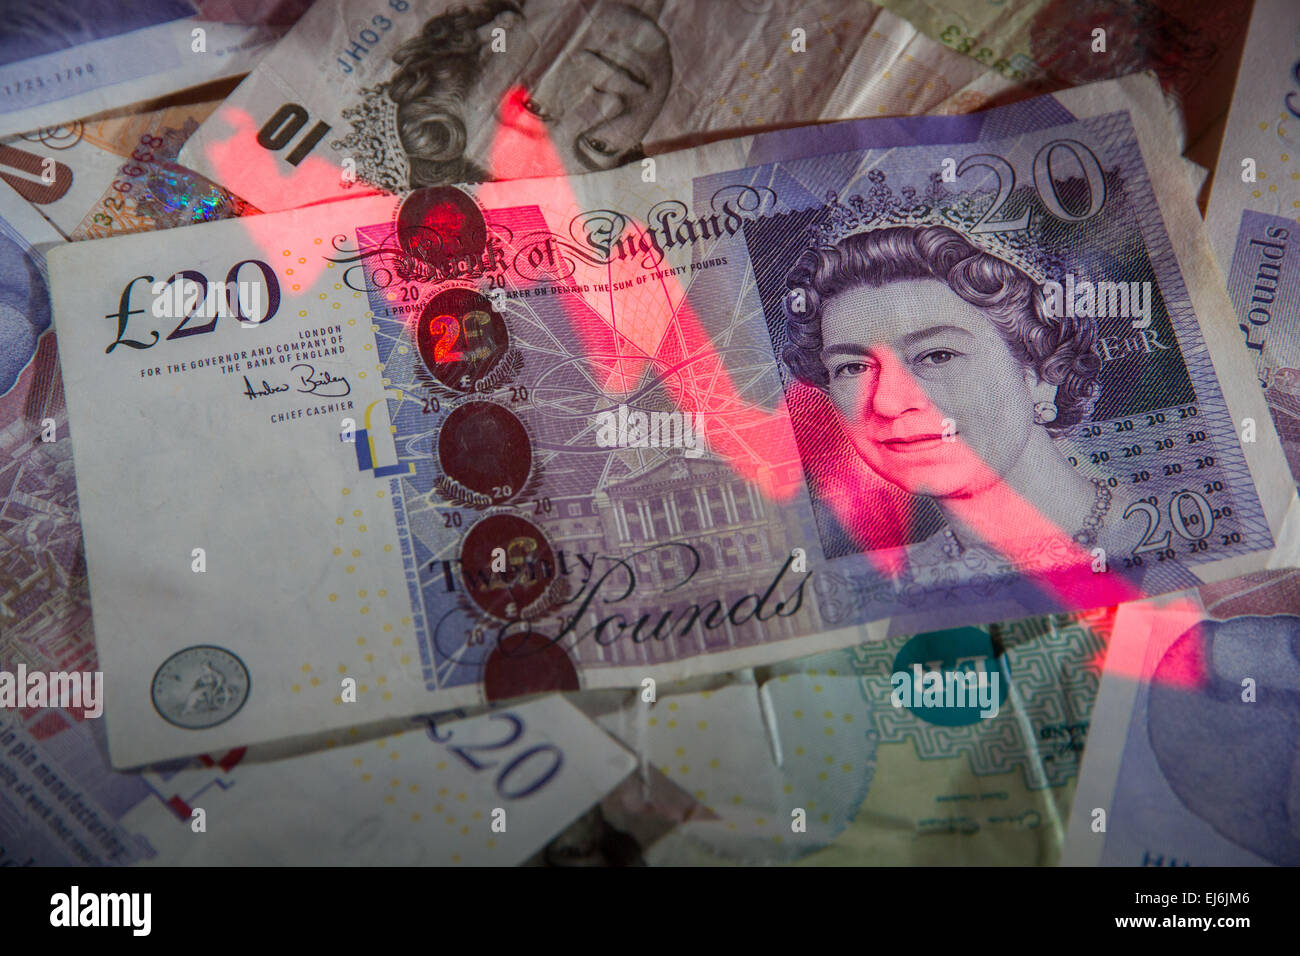 A negative graph projected onto a pile of British banknotes. Stock Photo